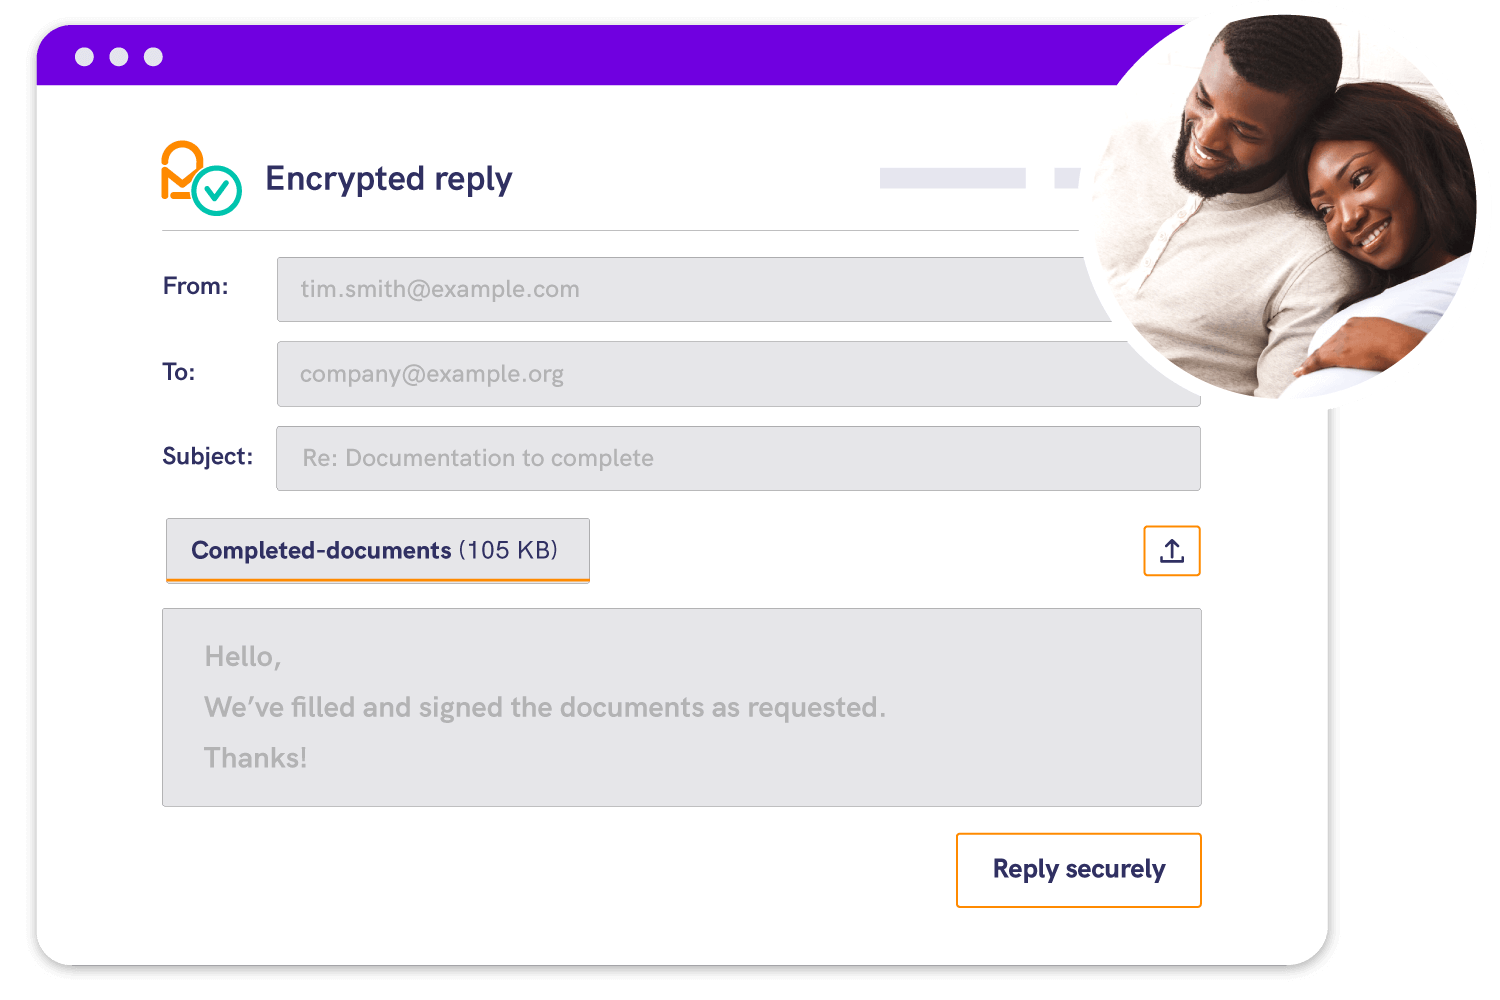 Customers receiving encrypted email and replying